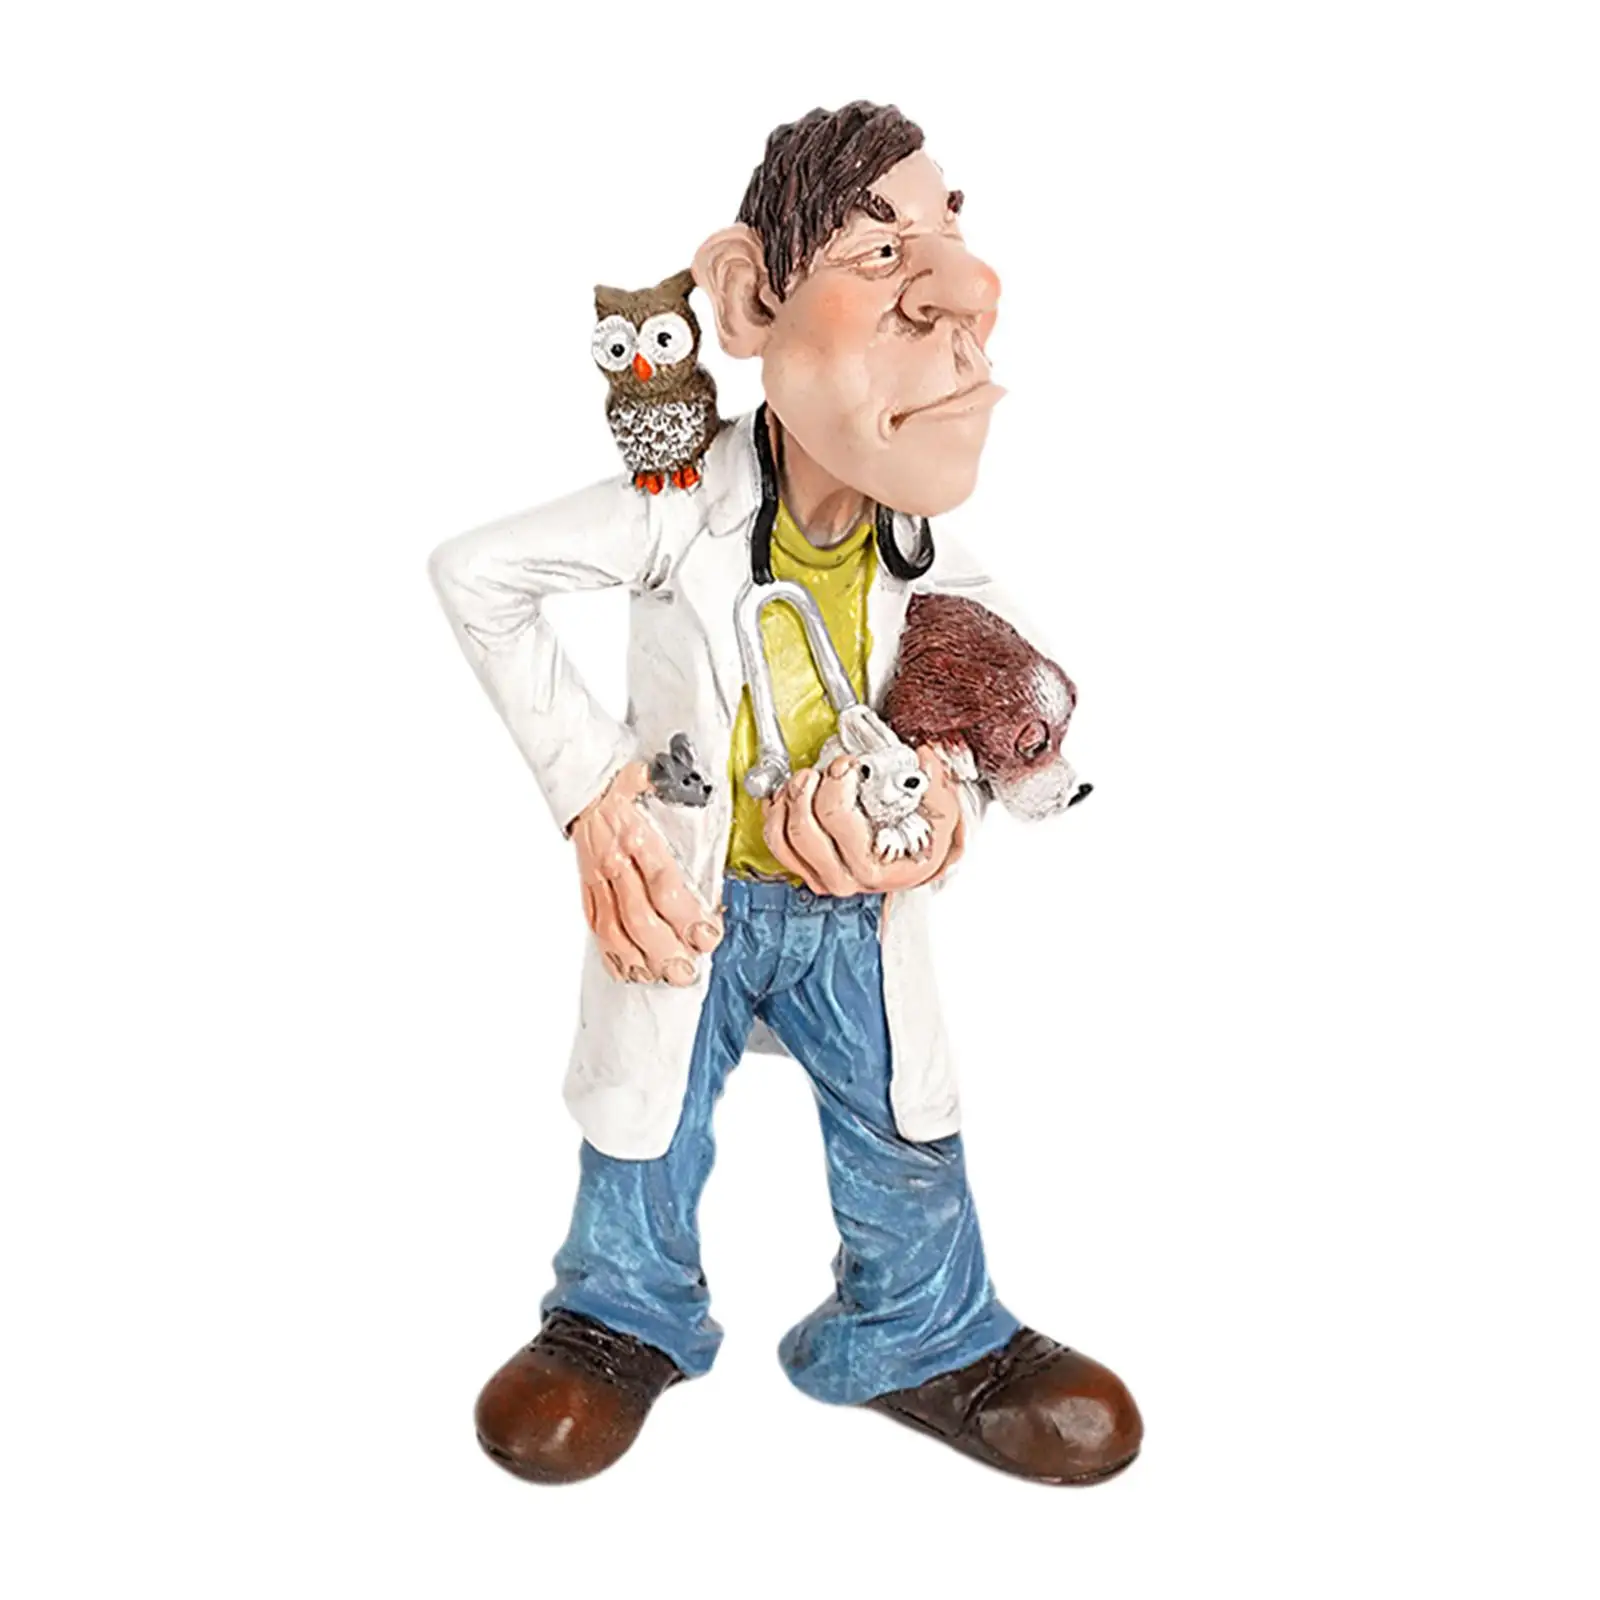 Doctor Statues Figurines Abstract Figure Resin Sculptures for Countertop